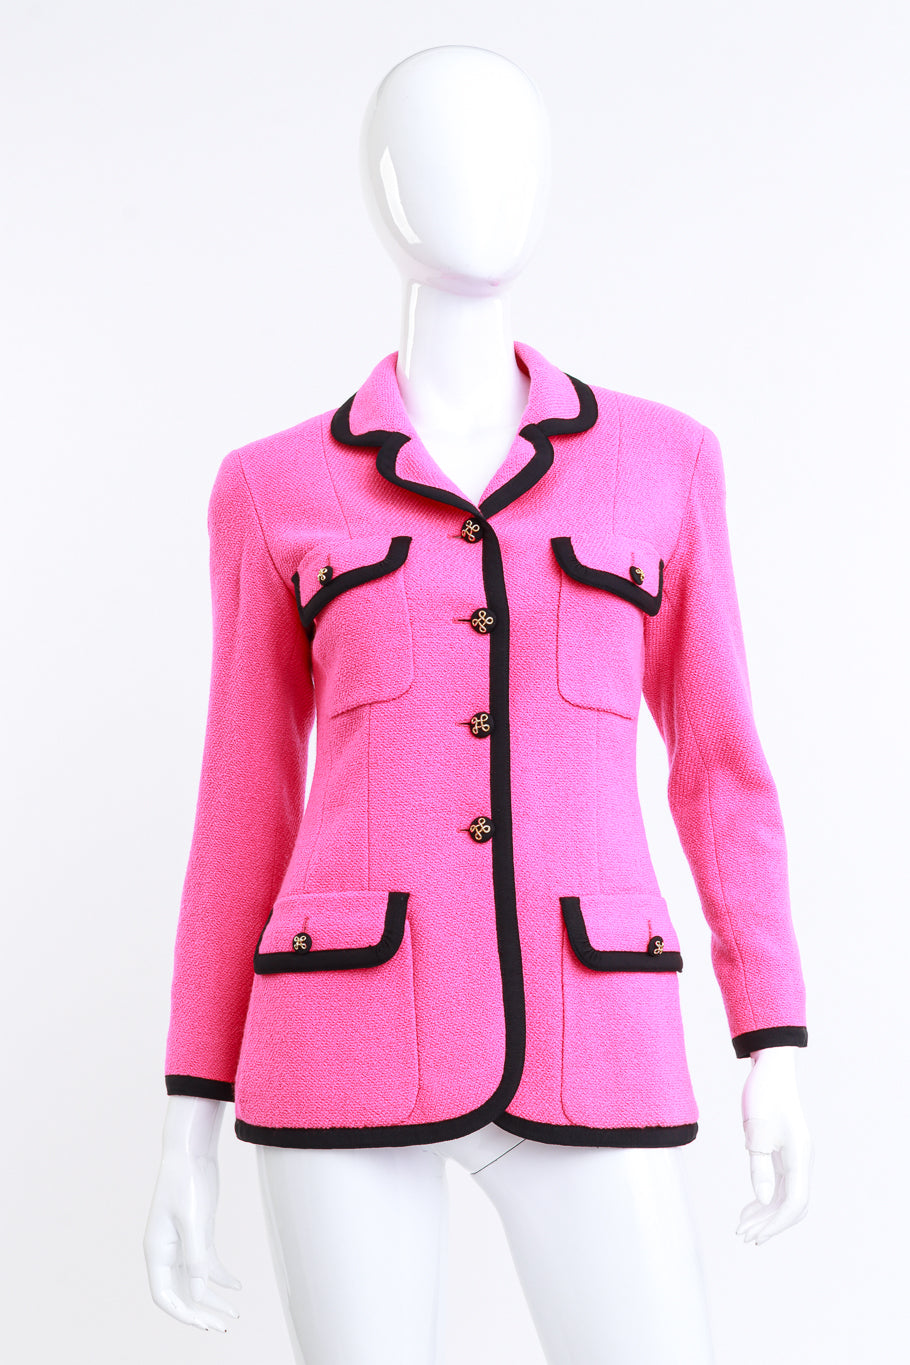 Chanel 1991 S/S Collection 25 Fuchsia Boucle Jacket on mannequin @RECESS LA